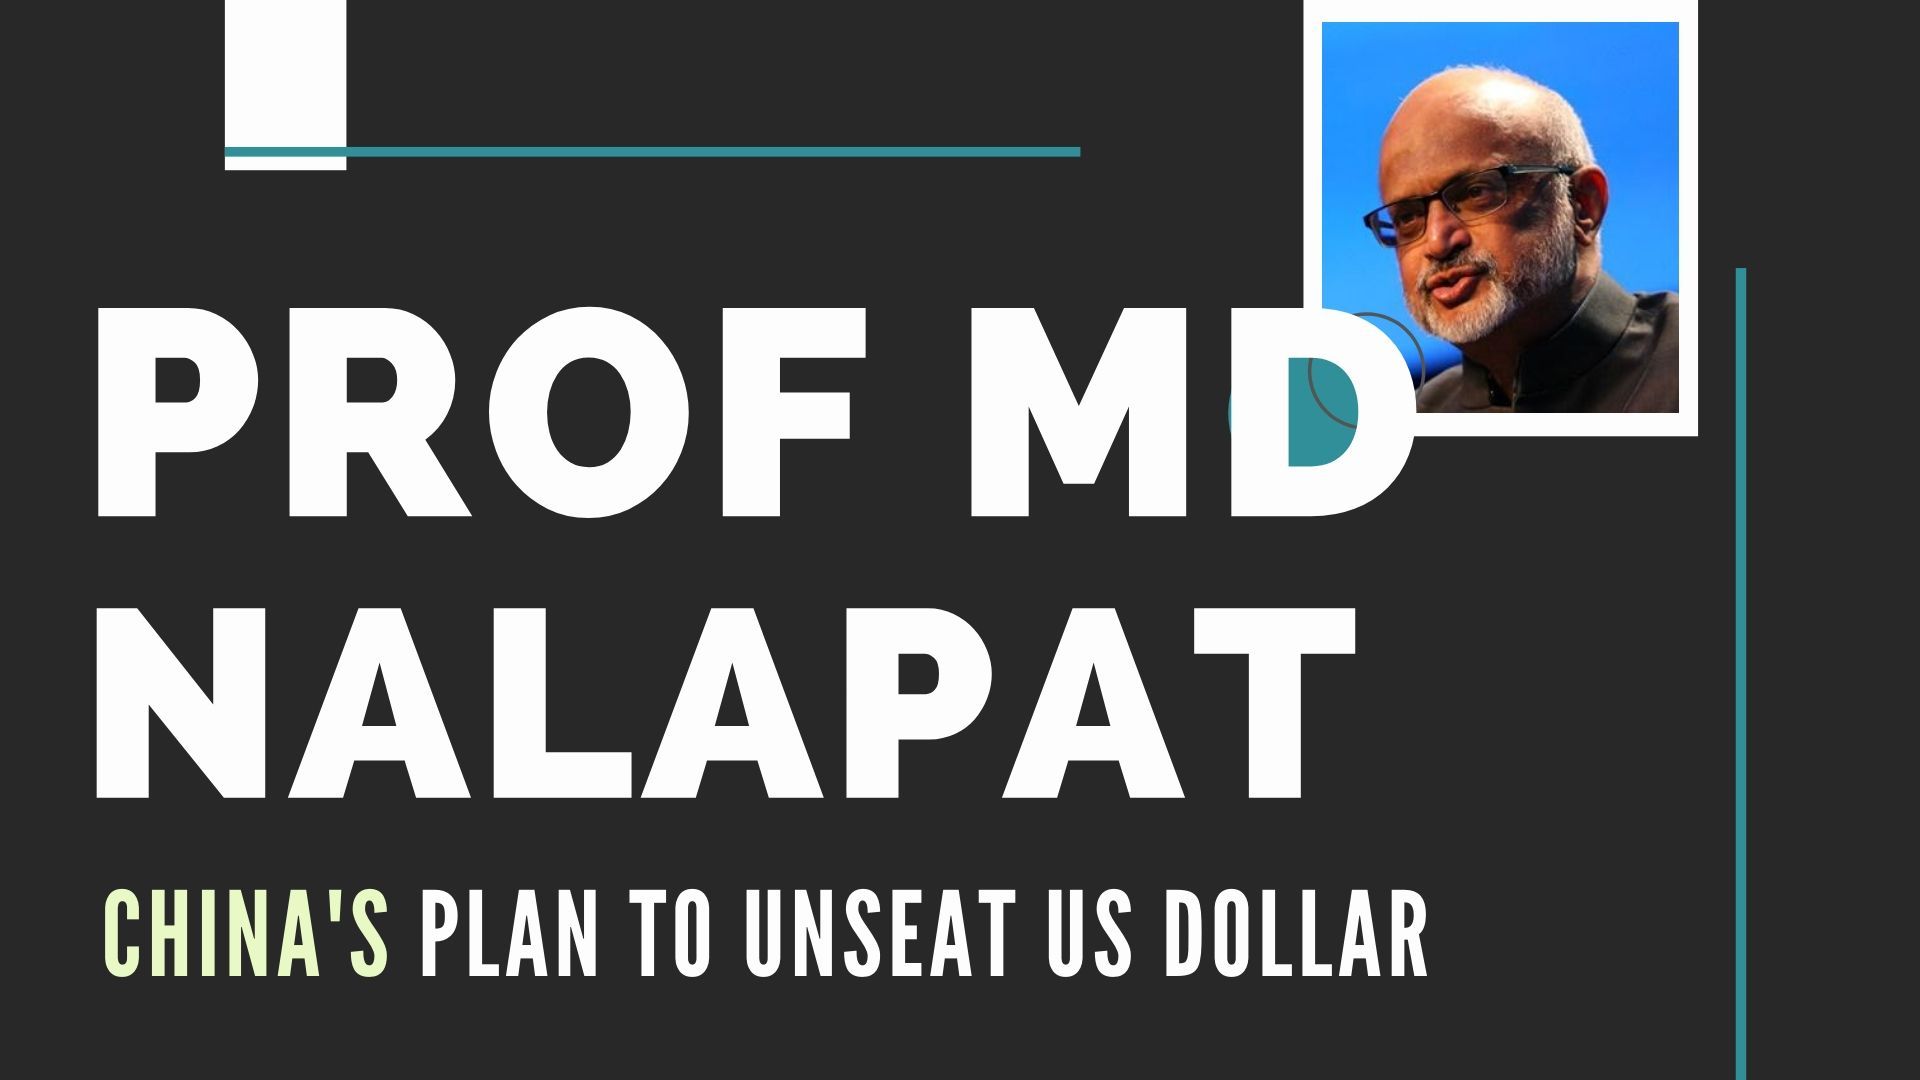 The latest US-China trade war has made China make several moves. Prof. M D Nalapat dissects the various pulls and pressures and the reason China is pushing Blockchain-based technologies in currency & buying up gold to try and unseat the US Dollar. A compelling video must watch!